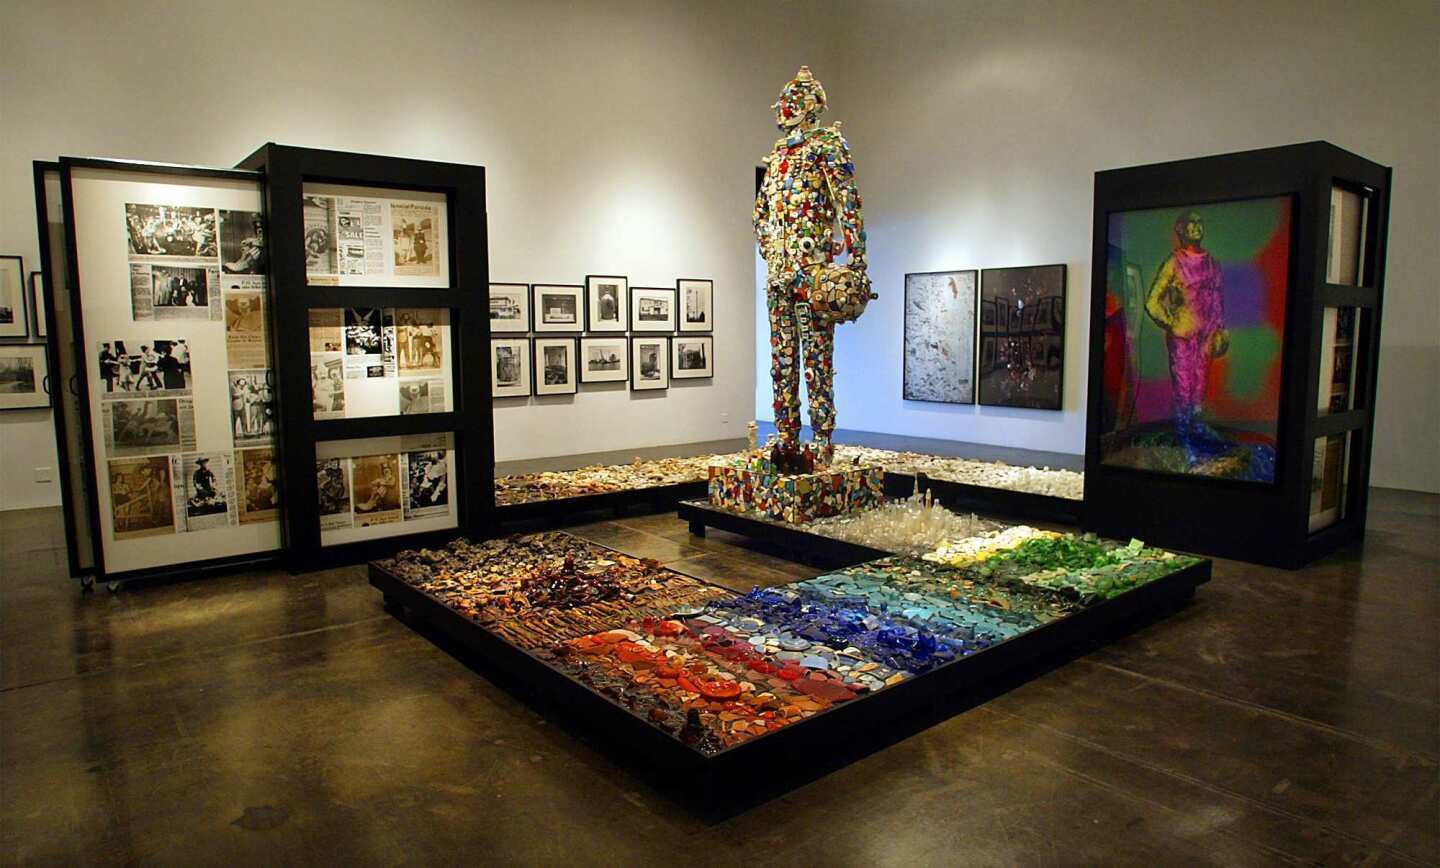 An installation view of Kelley's 2002 exhibition "Black Out" at Patrick Painter features the sculpture "John Glenn Memorial Detroit River Reclamation Project." It includes two big storage racks of archival newspaper stories connected by a low, trash-strewn platform. In the center is a larger-than-life statue of astronaut John Glenn, made from broken crockery.